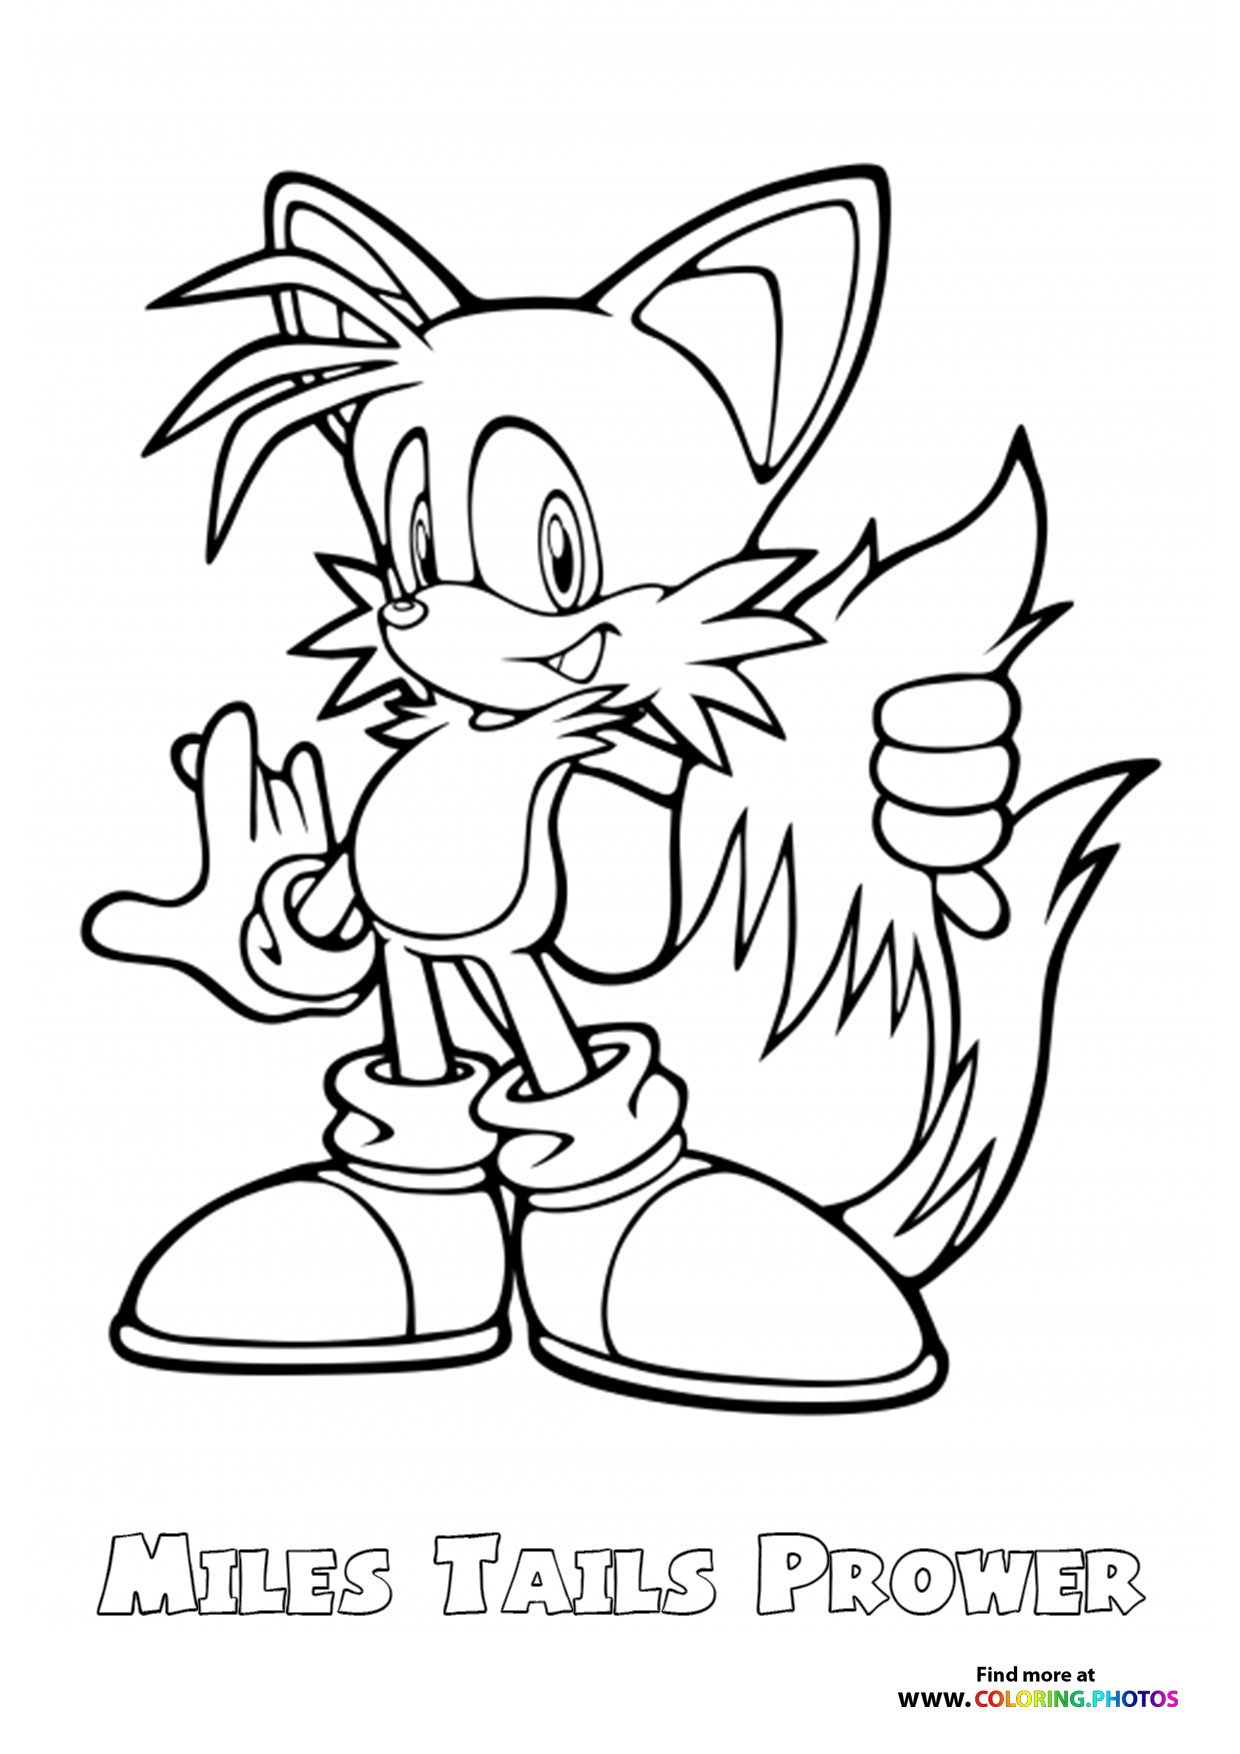 Miles Tails Prower - Coloring Pages for kids